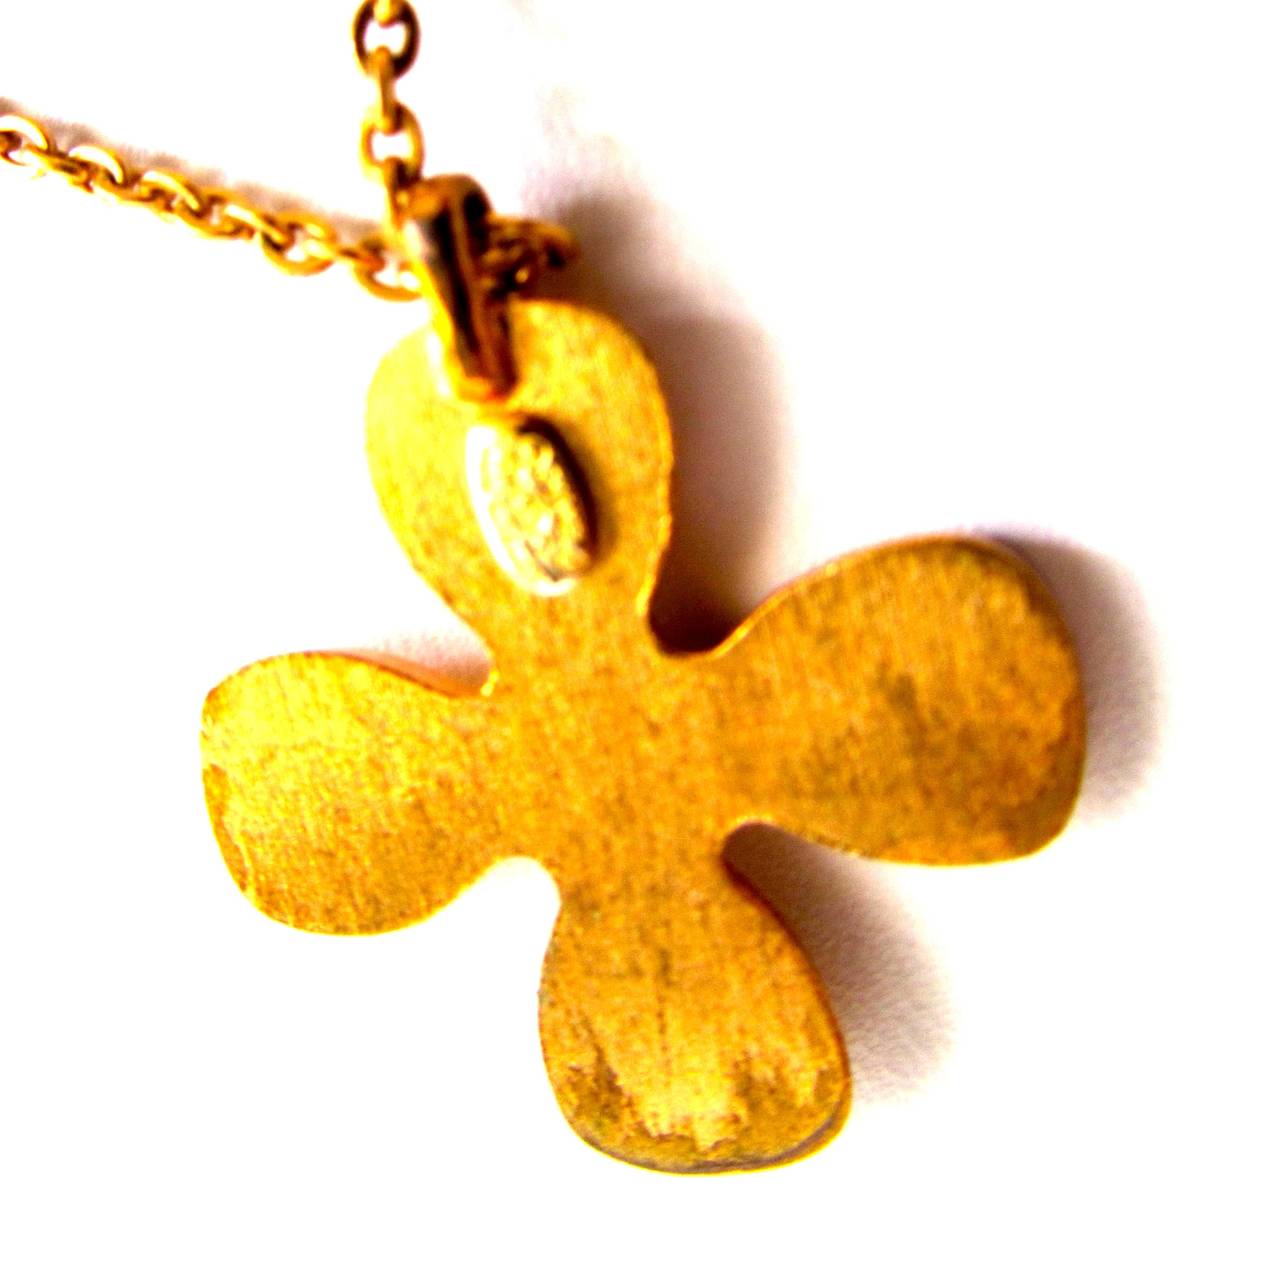 Chanel Necklace from the late 1990's. Gold toned chain with charm. Crystals are inlaid into charm to form a cross shape inscribed on the interior of the clover shape. Chanel CC logo is on the center of the charm. Chain is 15 inches long. 0.9 inches